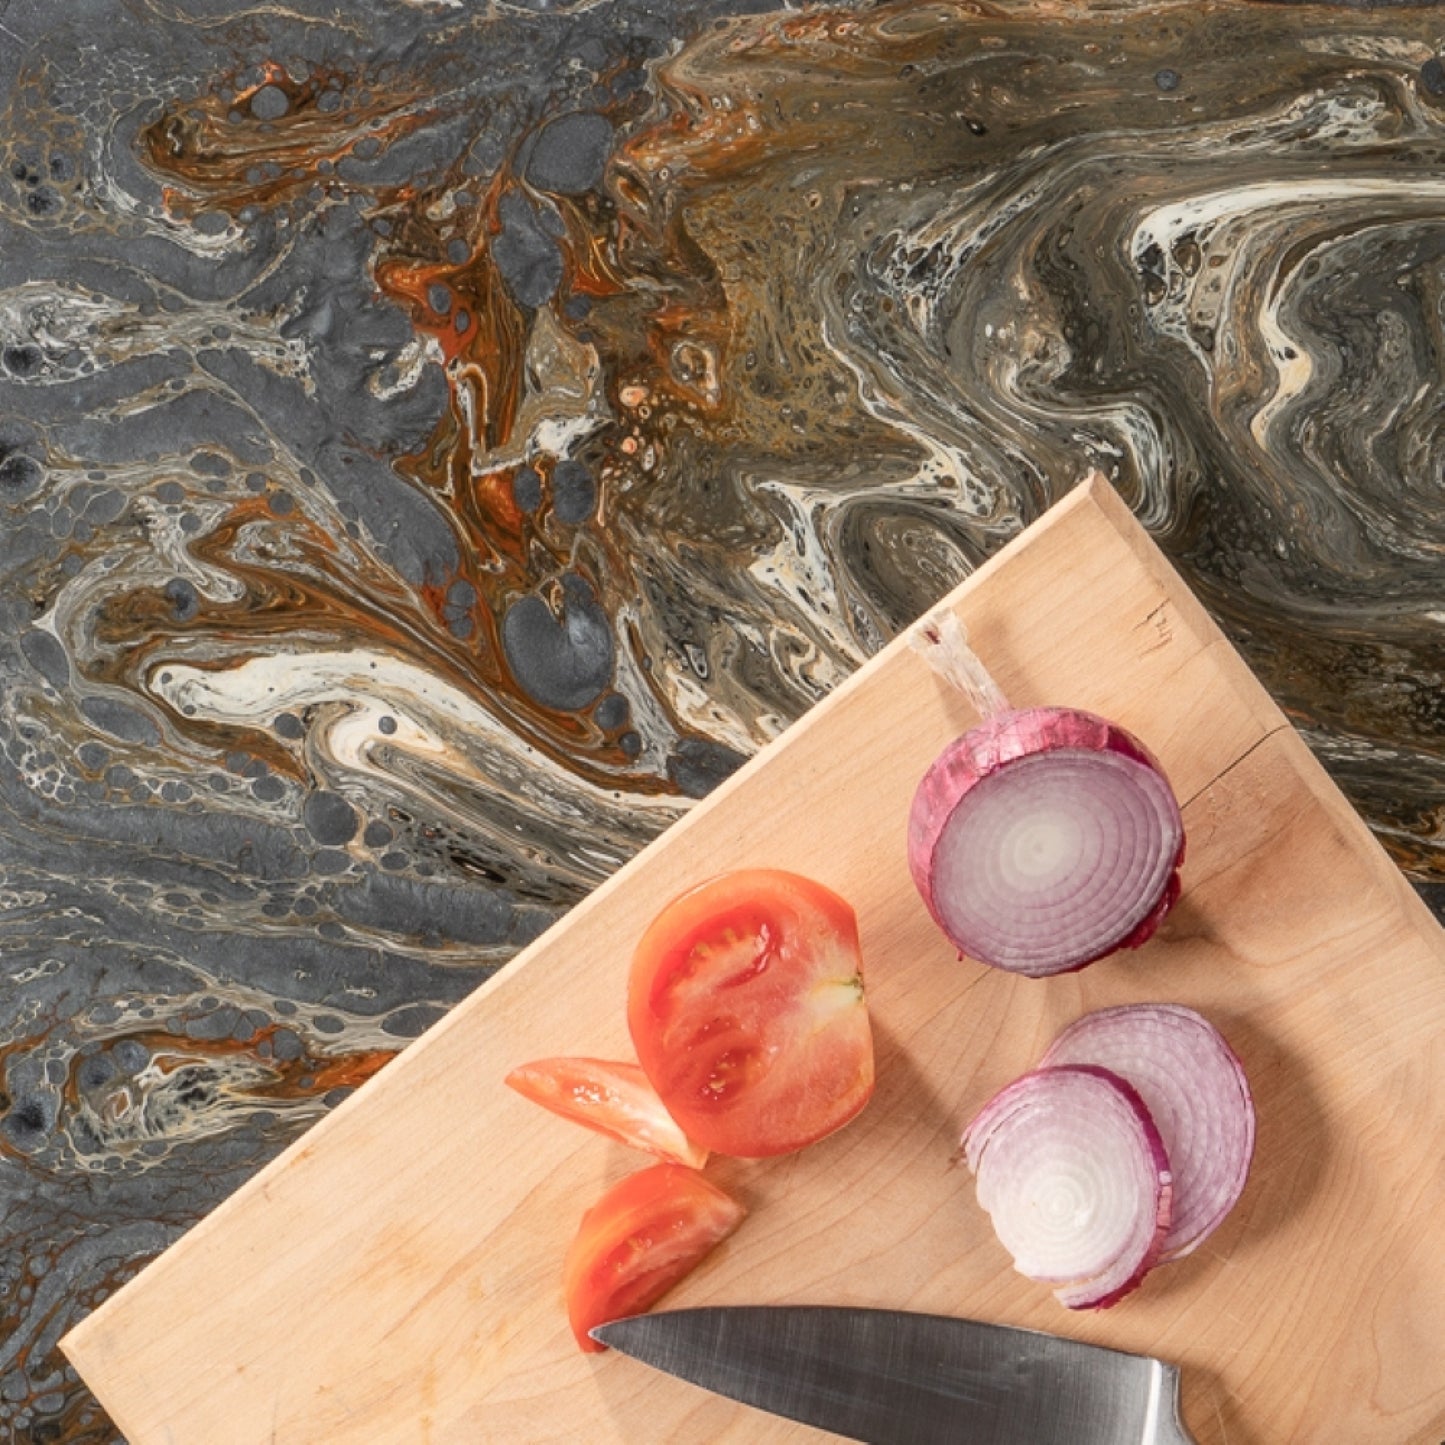 Unparalleled Beauty - CANYON Epoxy Countertop Kit for Artistic Kitchens